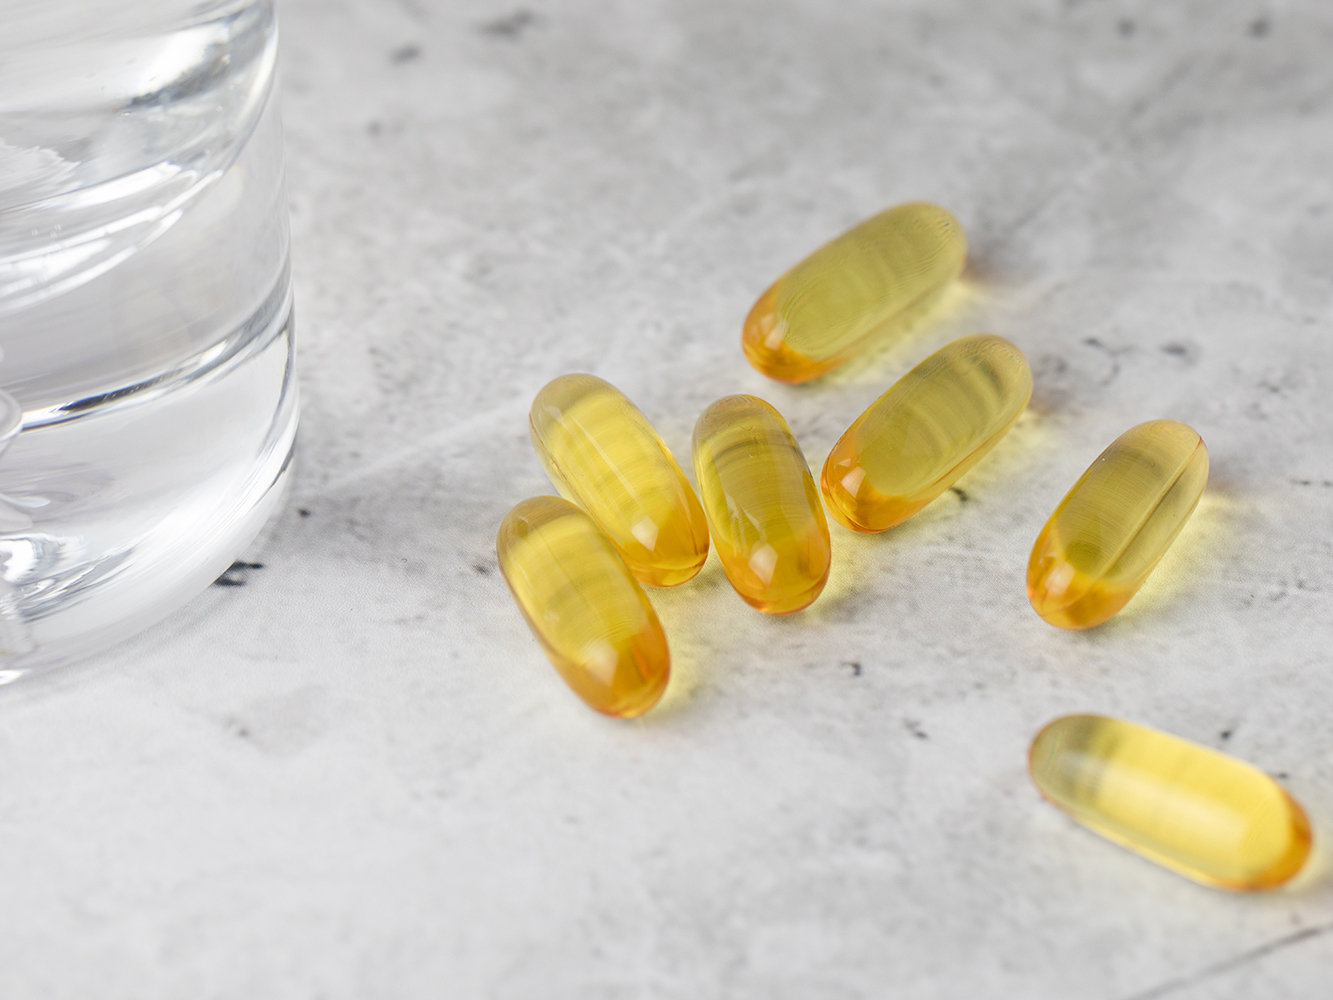 13 of the Best Anti-Aging Supplements to Look and Feel Good